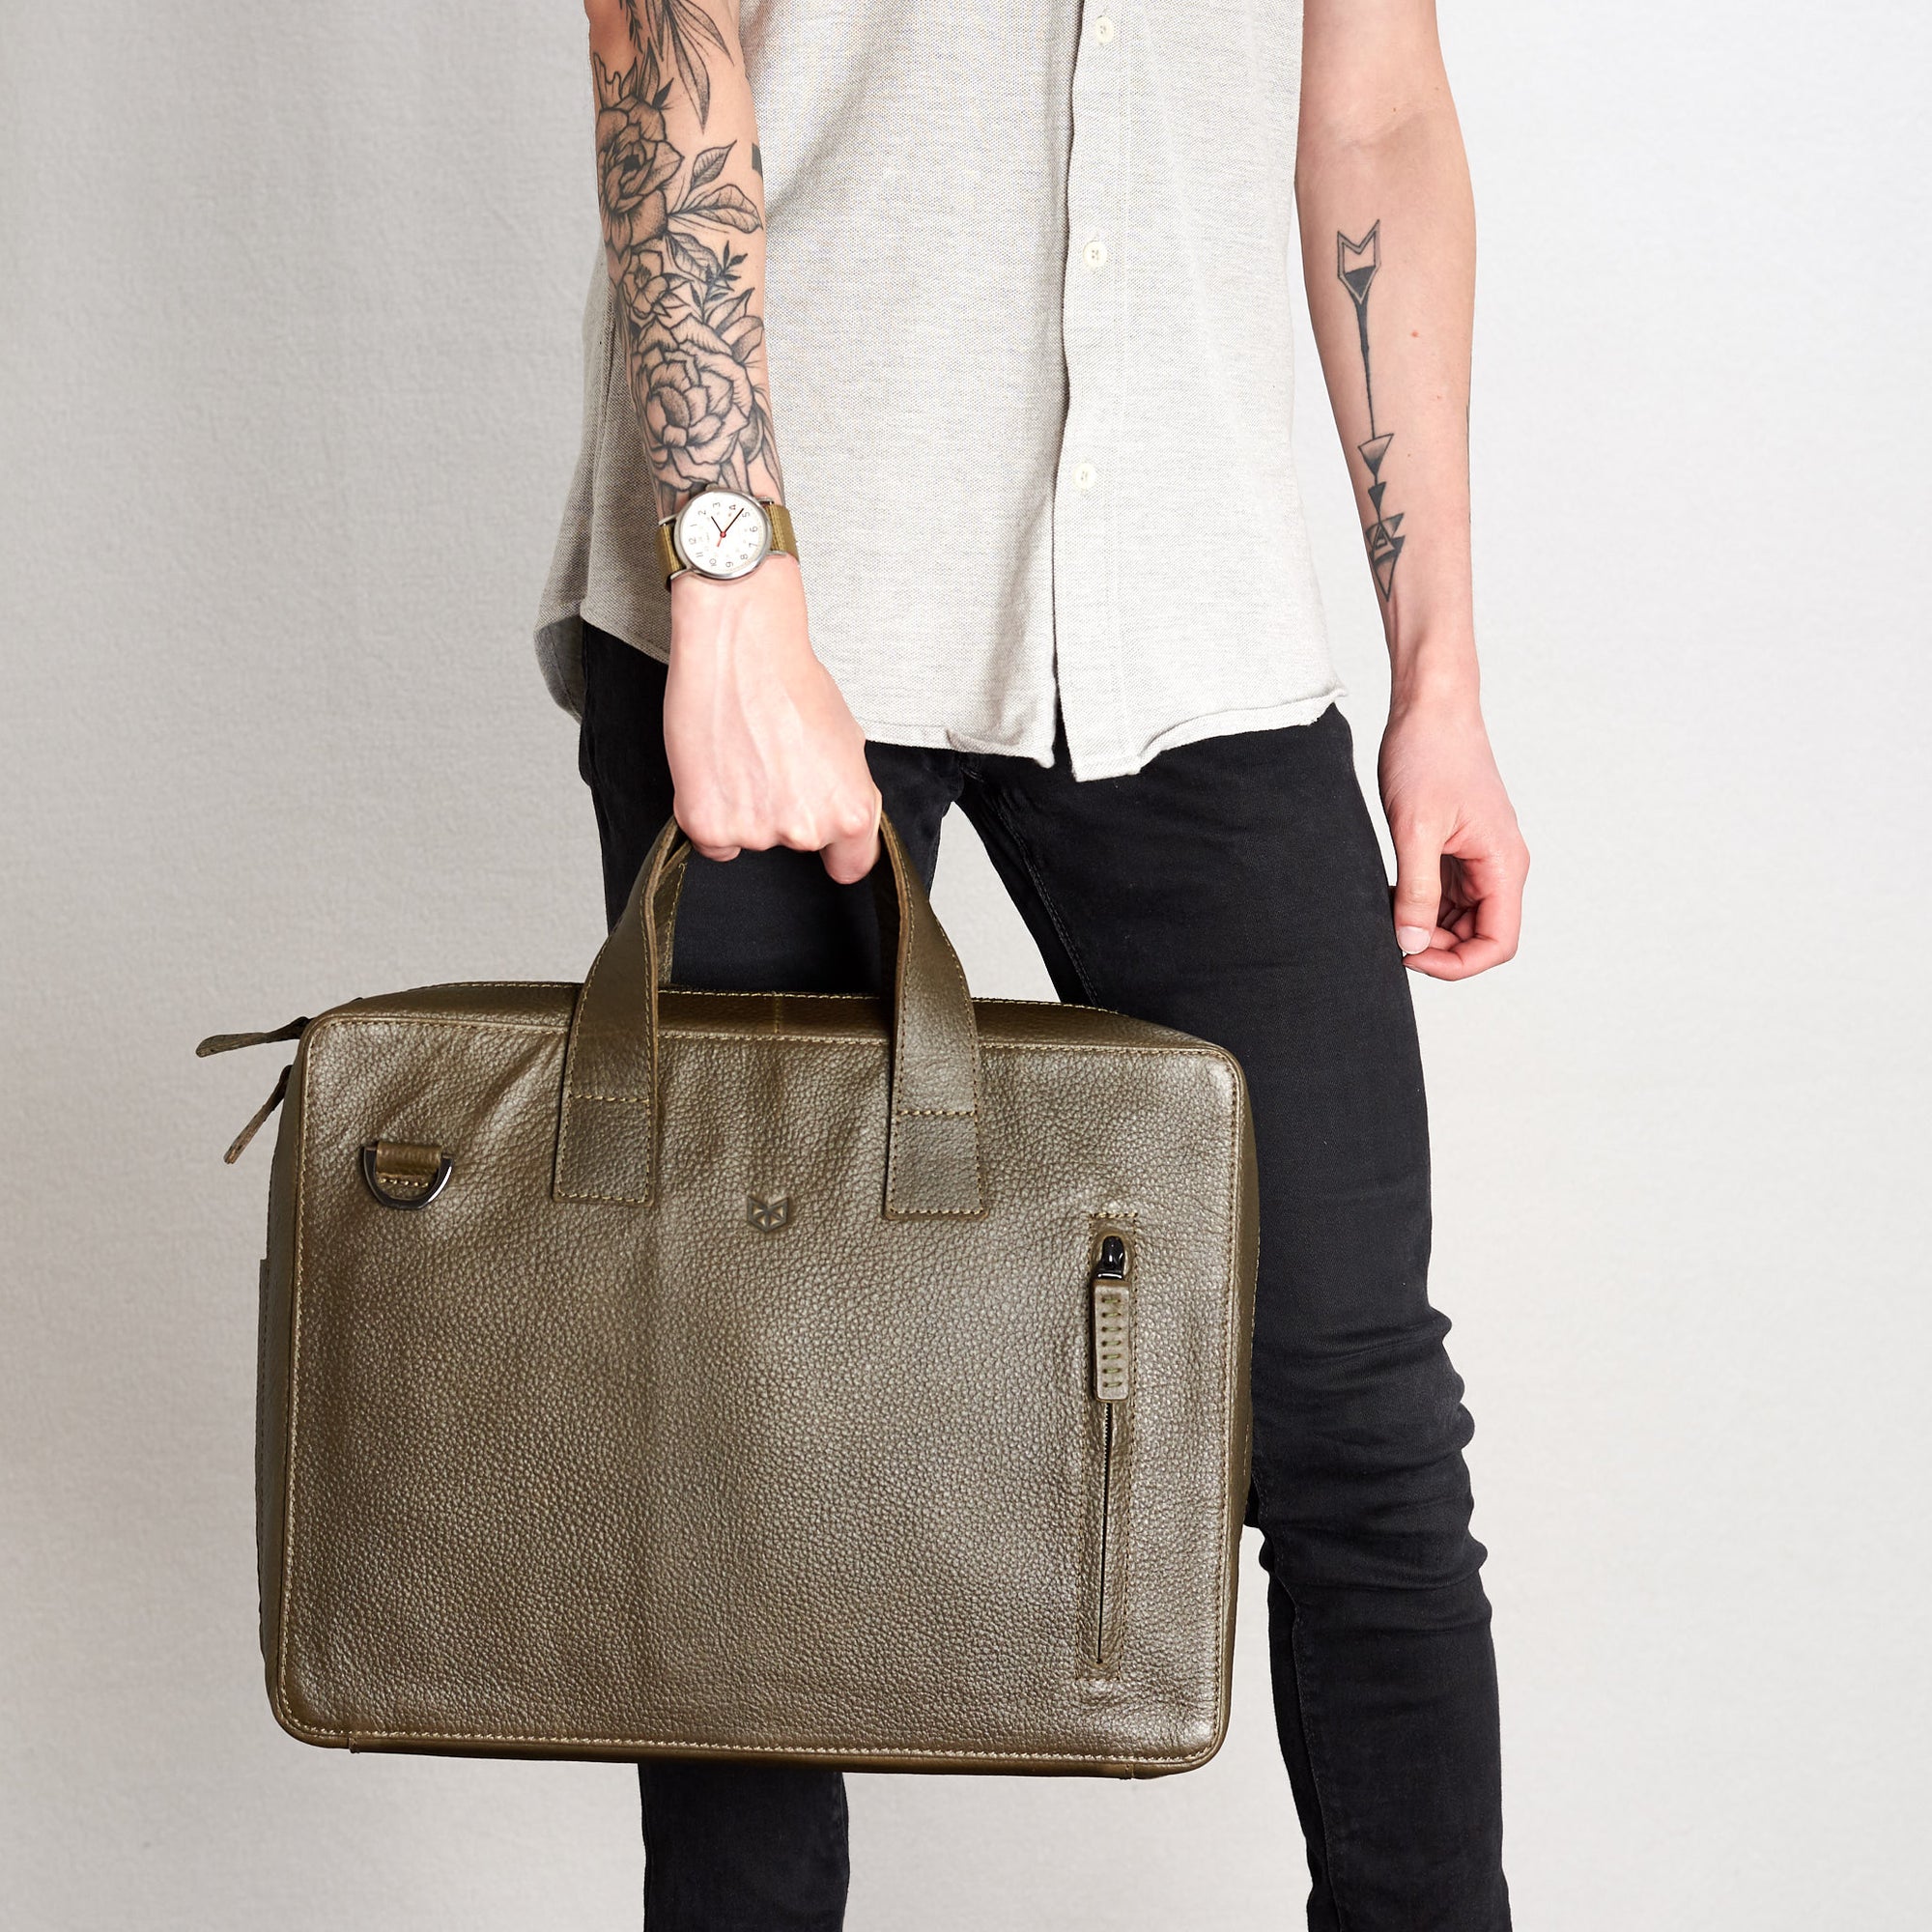 Style front picture handles holding Roko green briefcase.